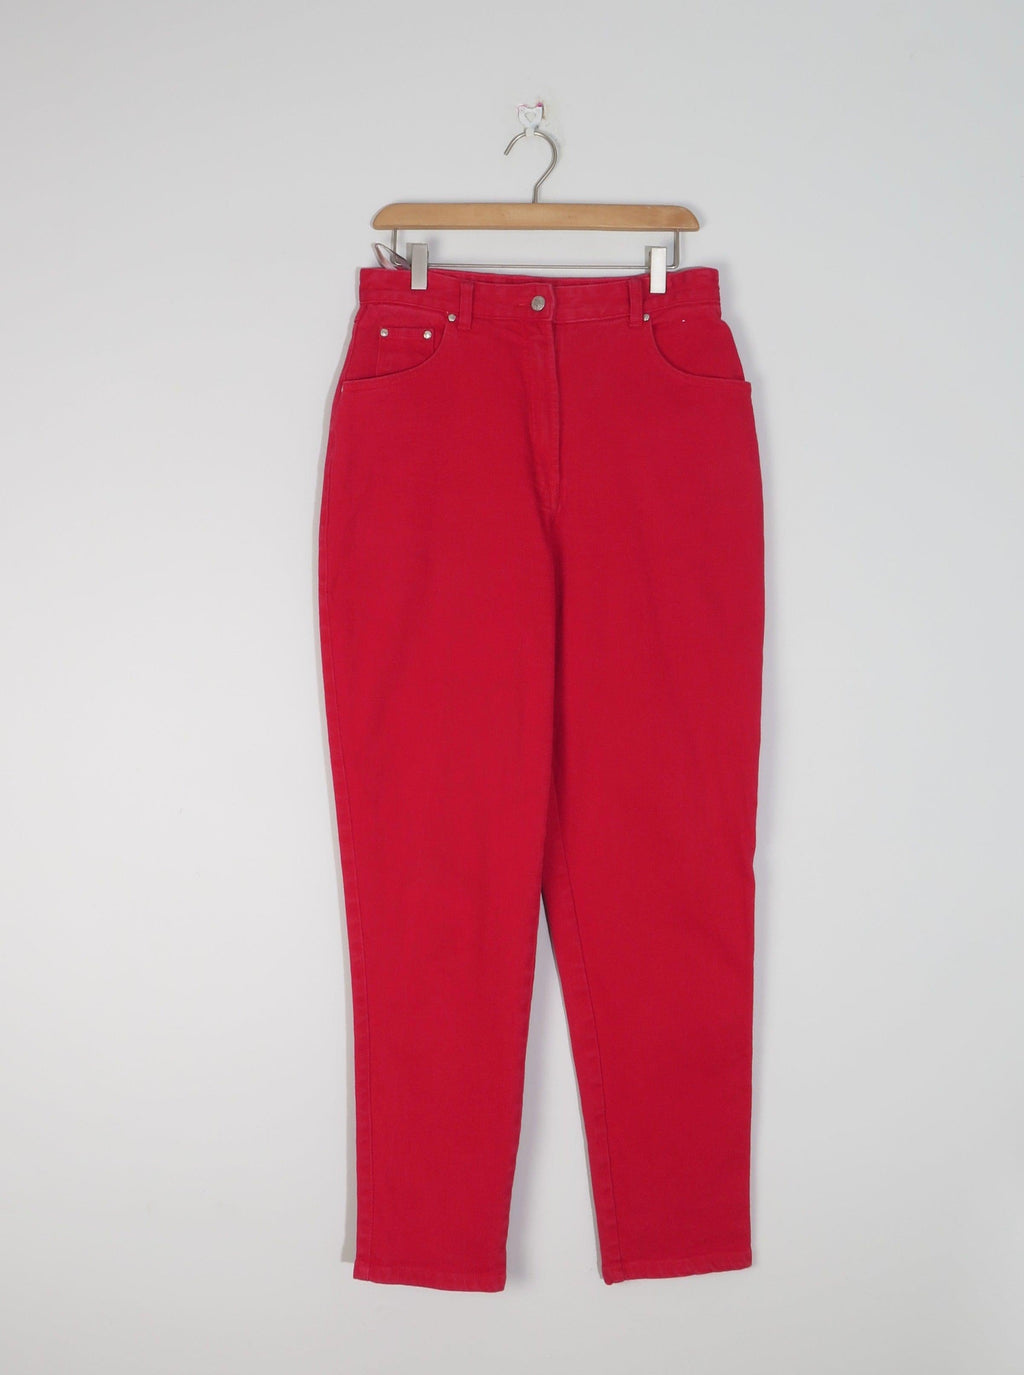 Cherry Red Jinglers Vintage Mom Jeans 31" 12 - The Harlequin